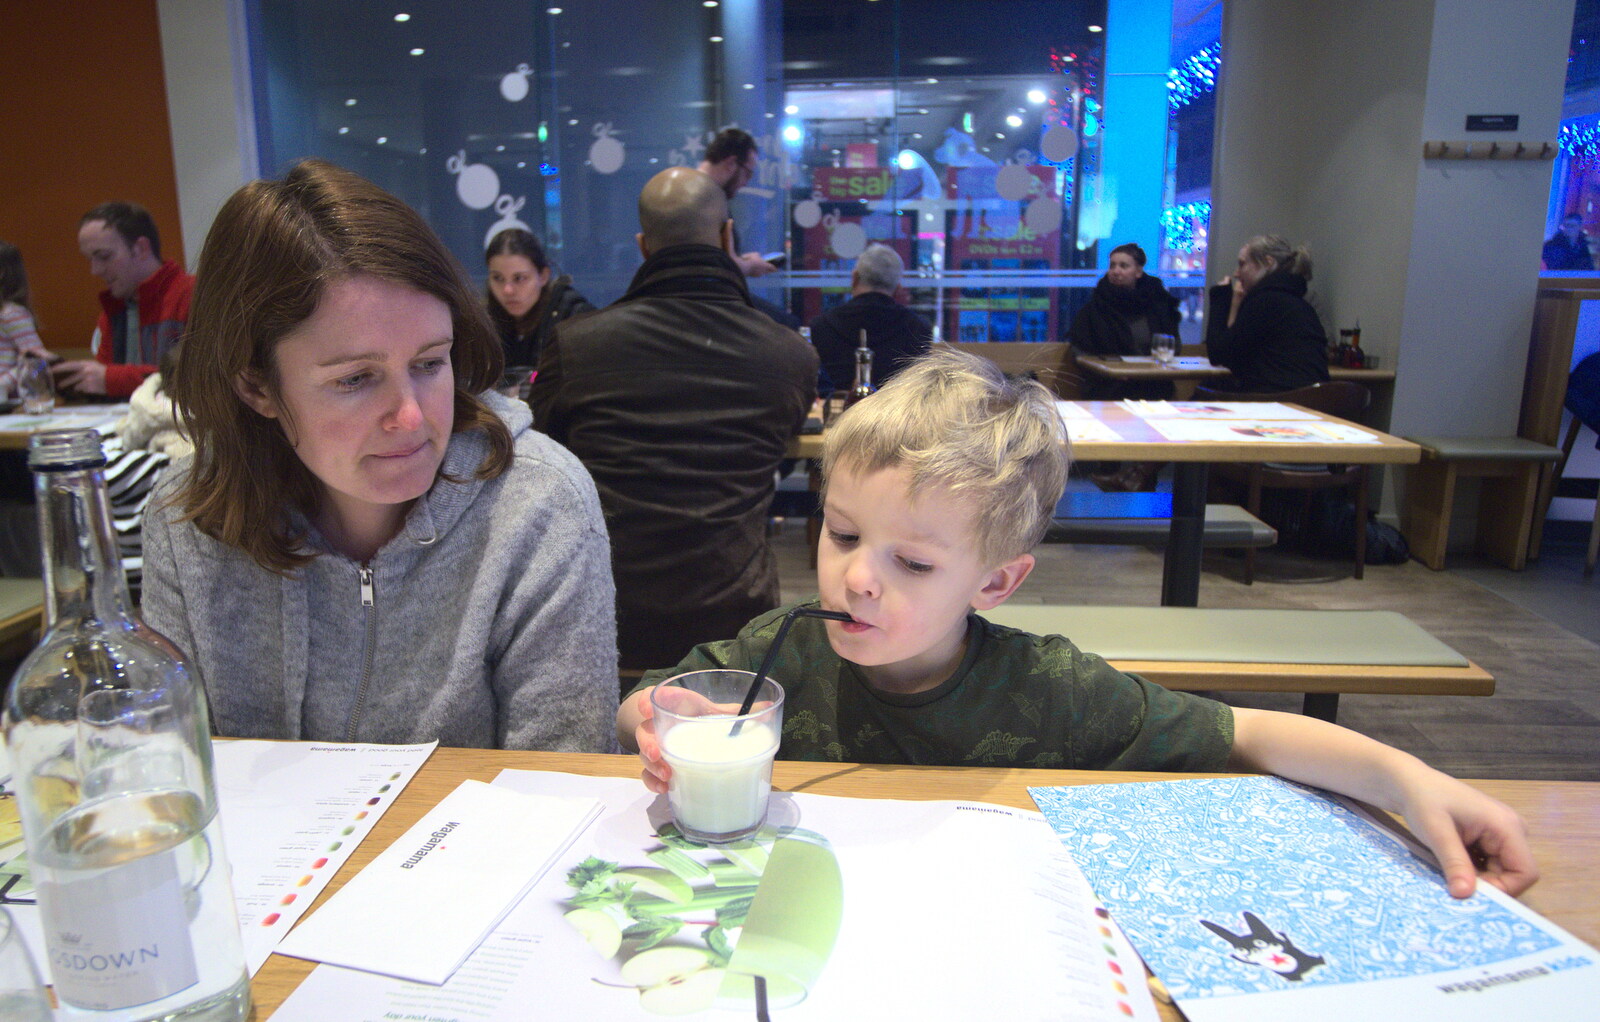 Isobel and Fred in Wagamama, Bury St. Edmunds from A Trip to Ickworth House, Horringer, Suffolk - 30th December 2016